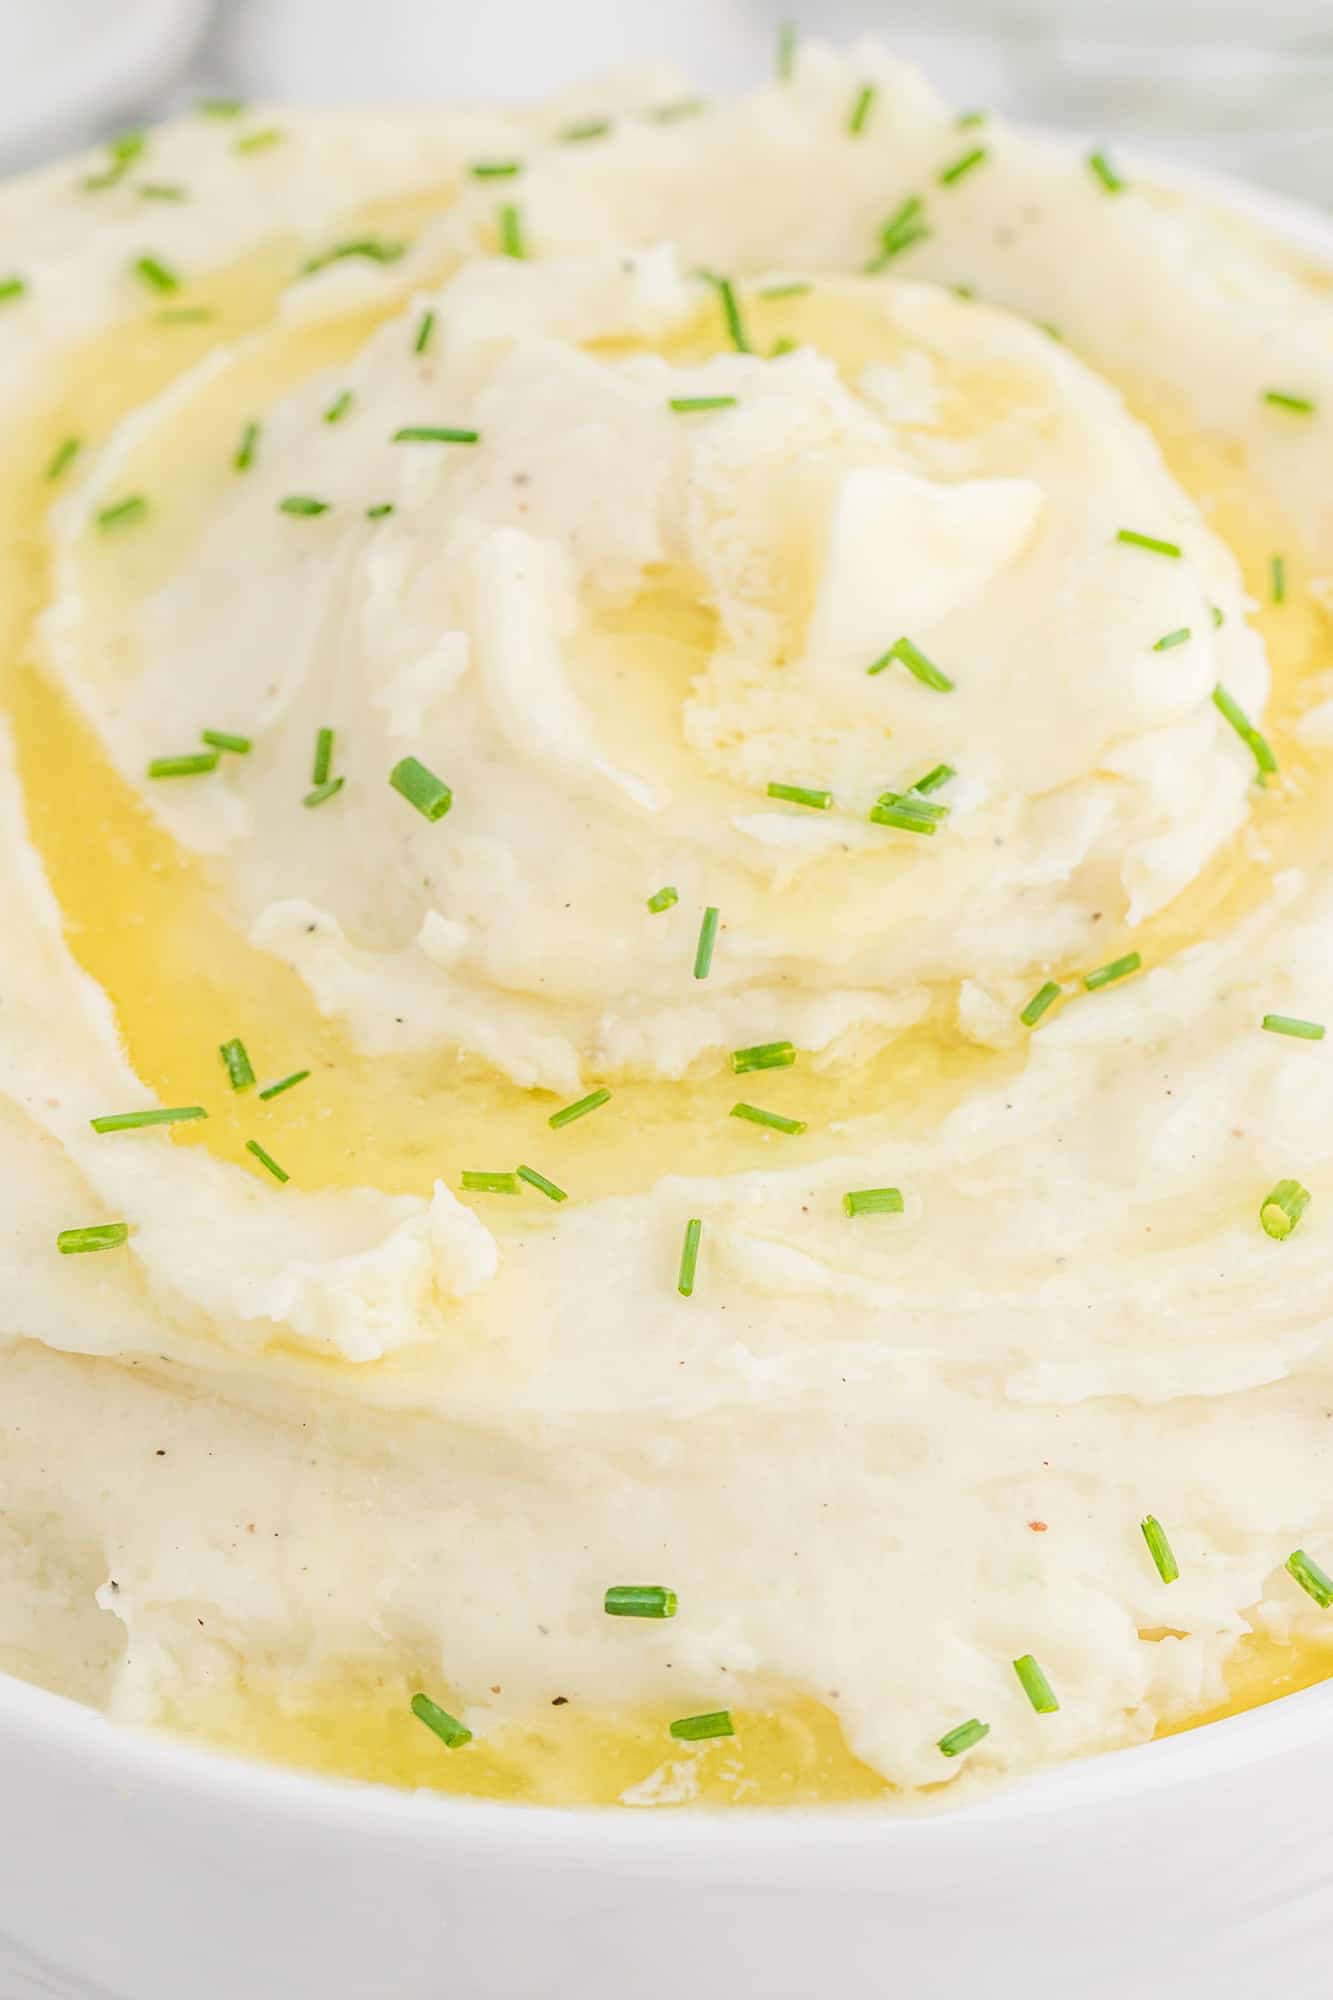 Mashed potatoes topped with butter, chives.